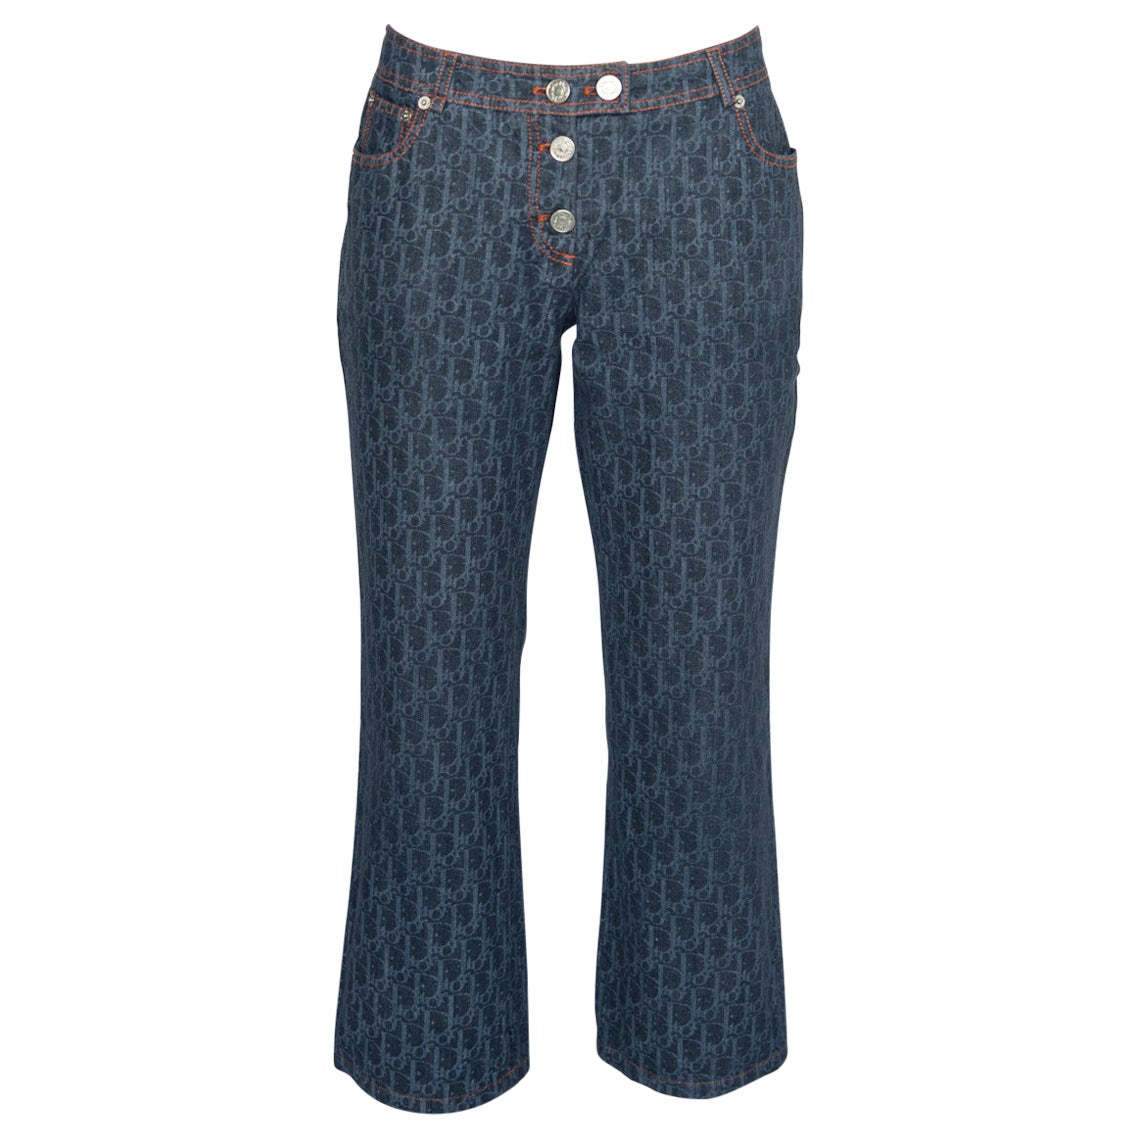 Christian Dior By John Galliano Diorissimo "Flight" Cropped Jeans Pants, SS2006 For Sale